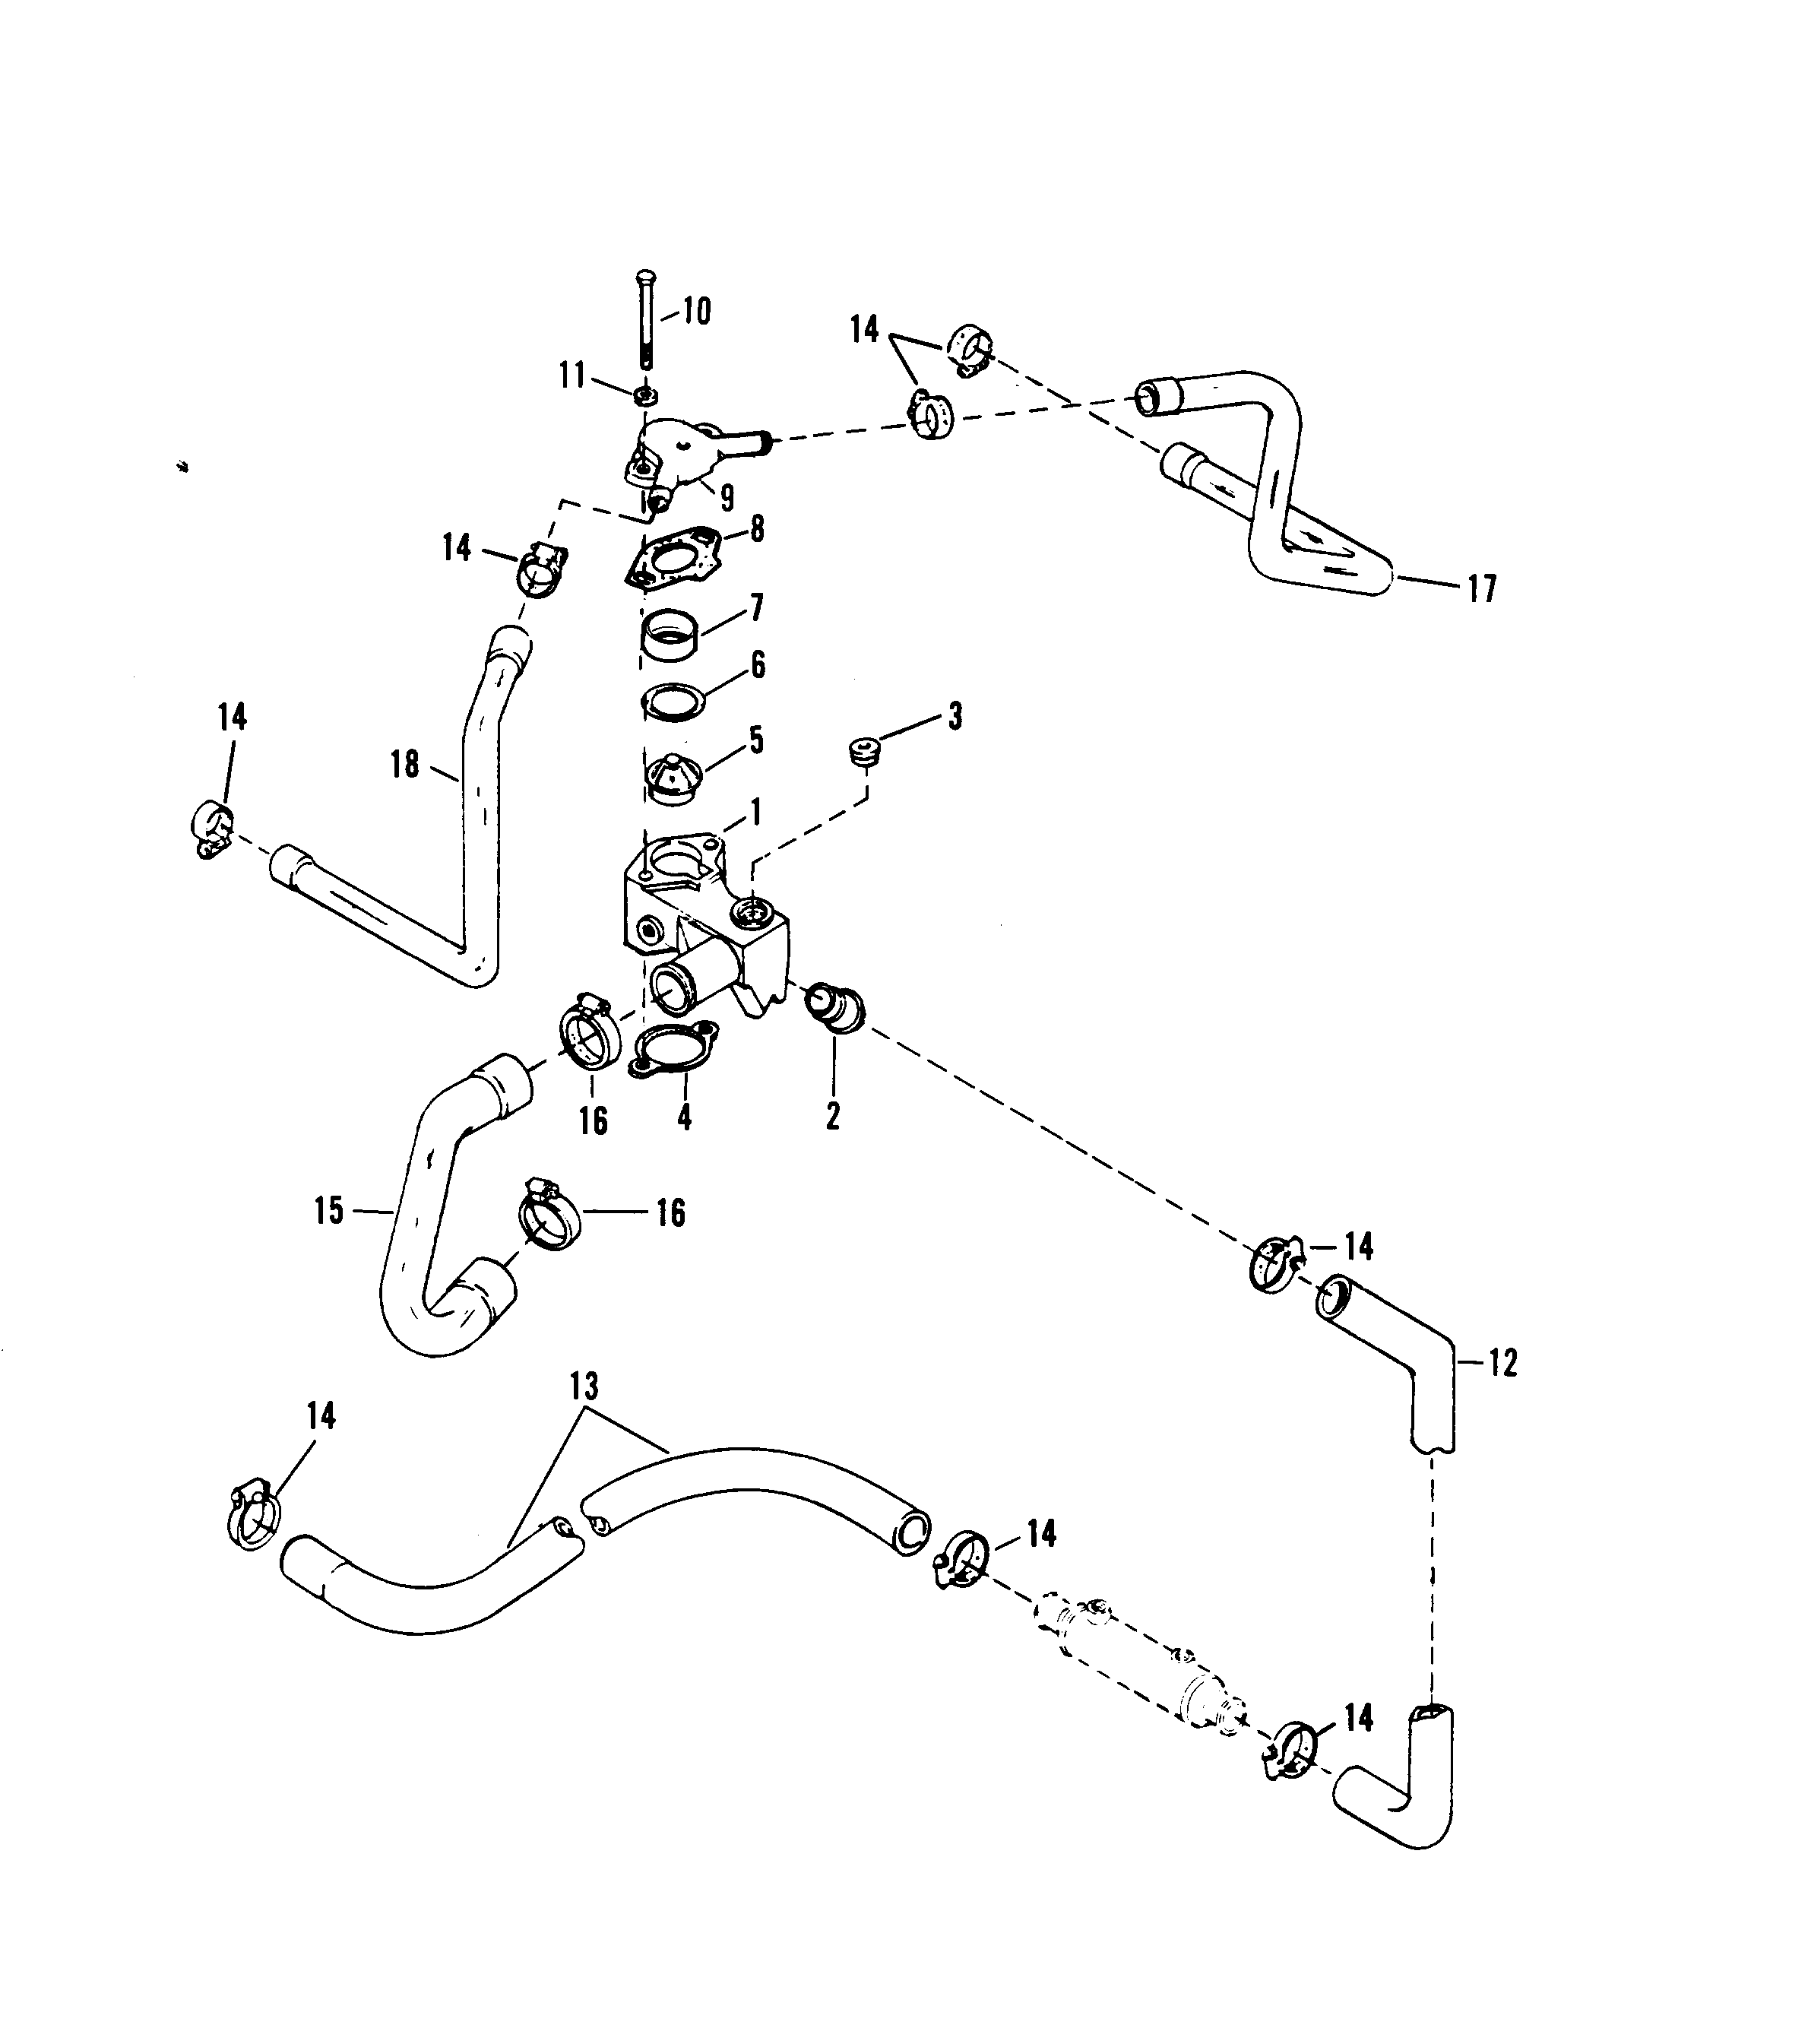 THERMOSTAT HOUSING (STANDARD COOLING)